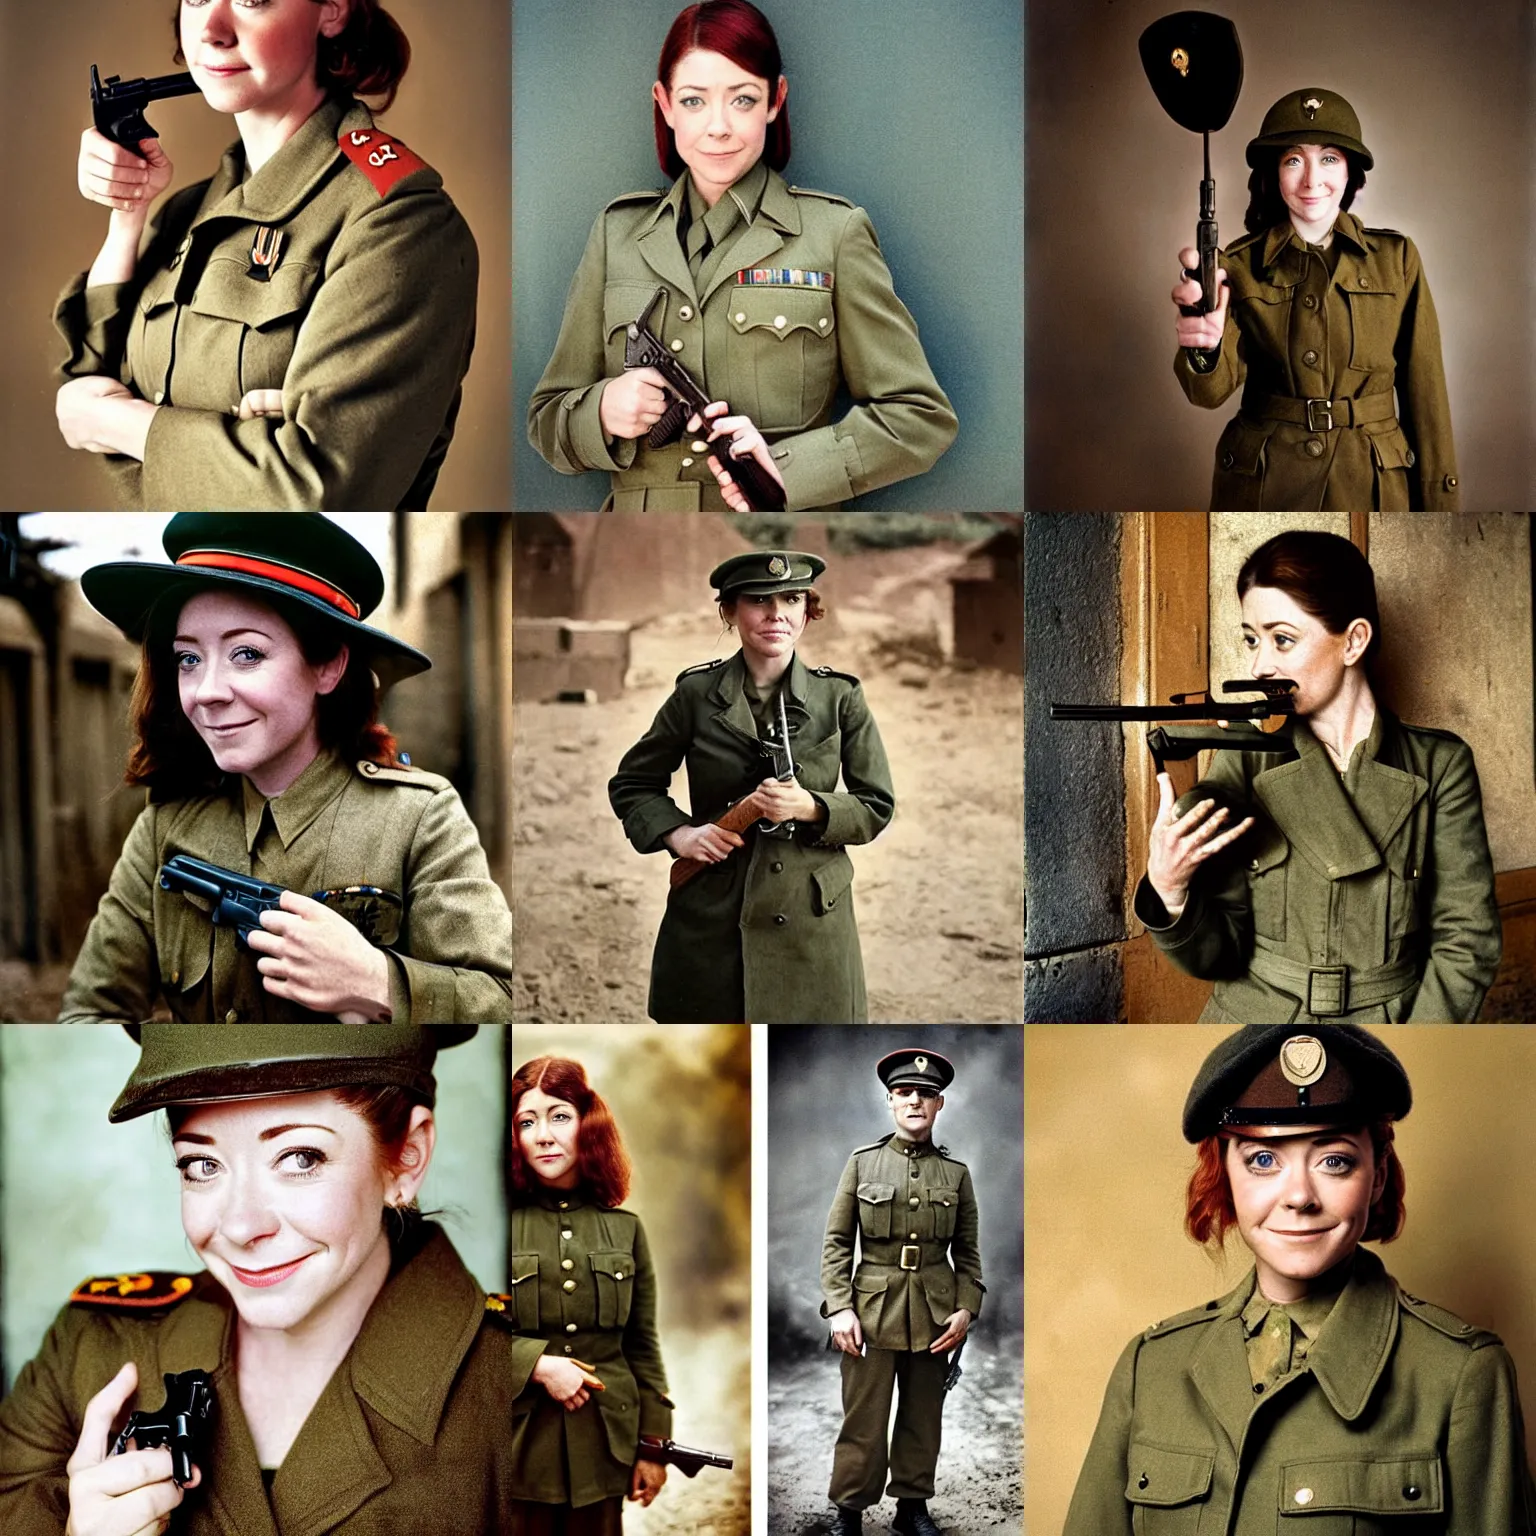 Prompt: Alyson Hannigan as an Army Officer, 1918, wearing a trenchcoat, holding a revolver, colour photo portrait by Steve McCurry